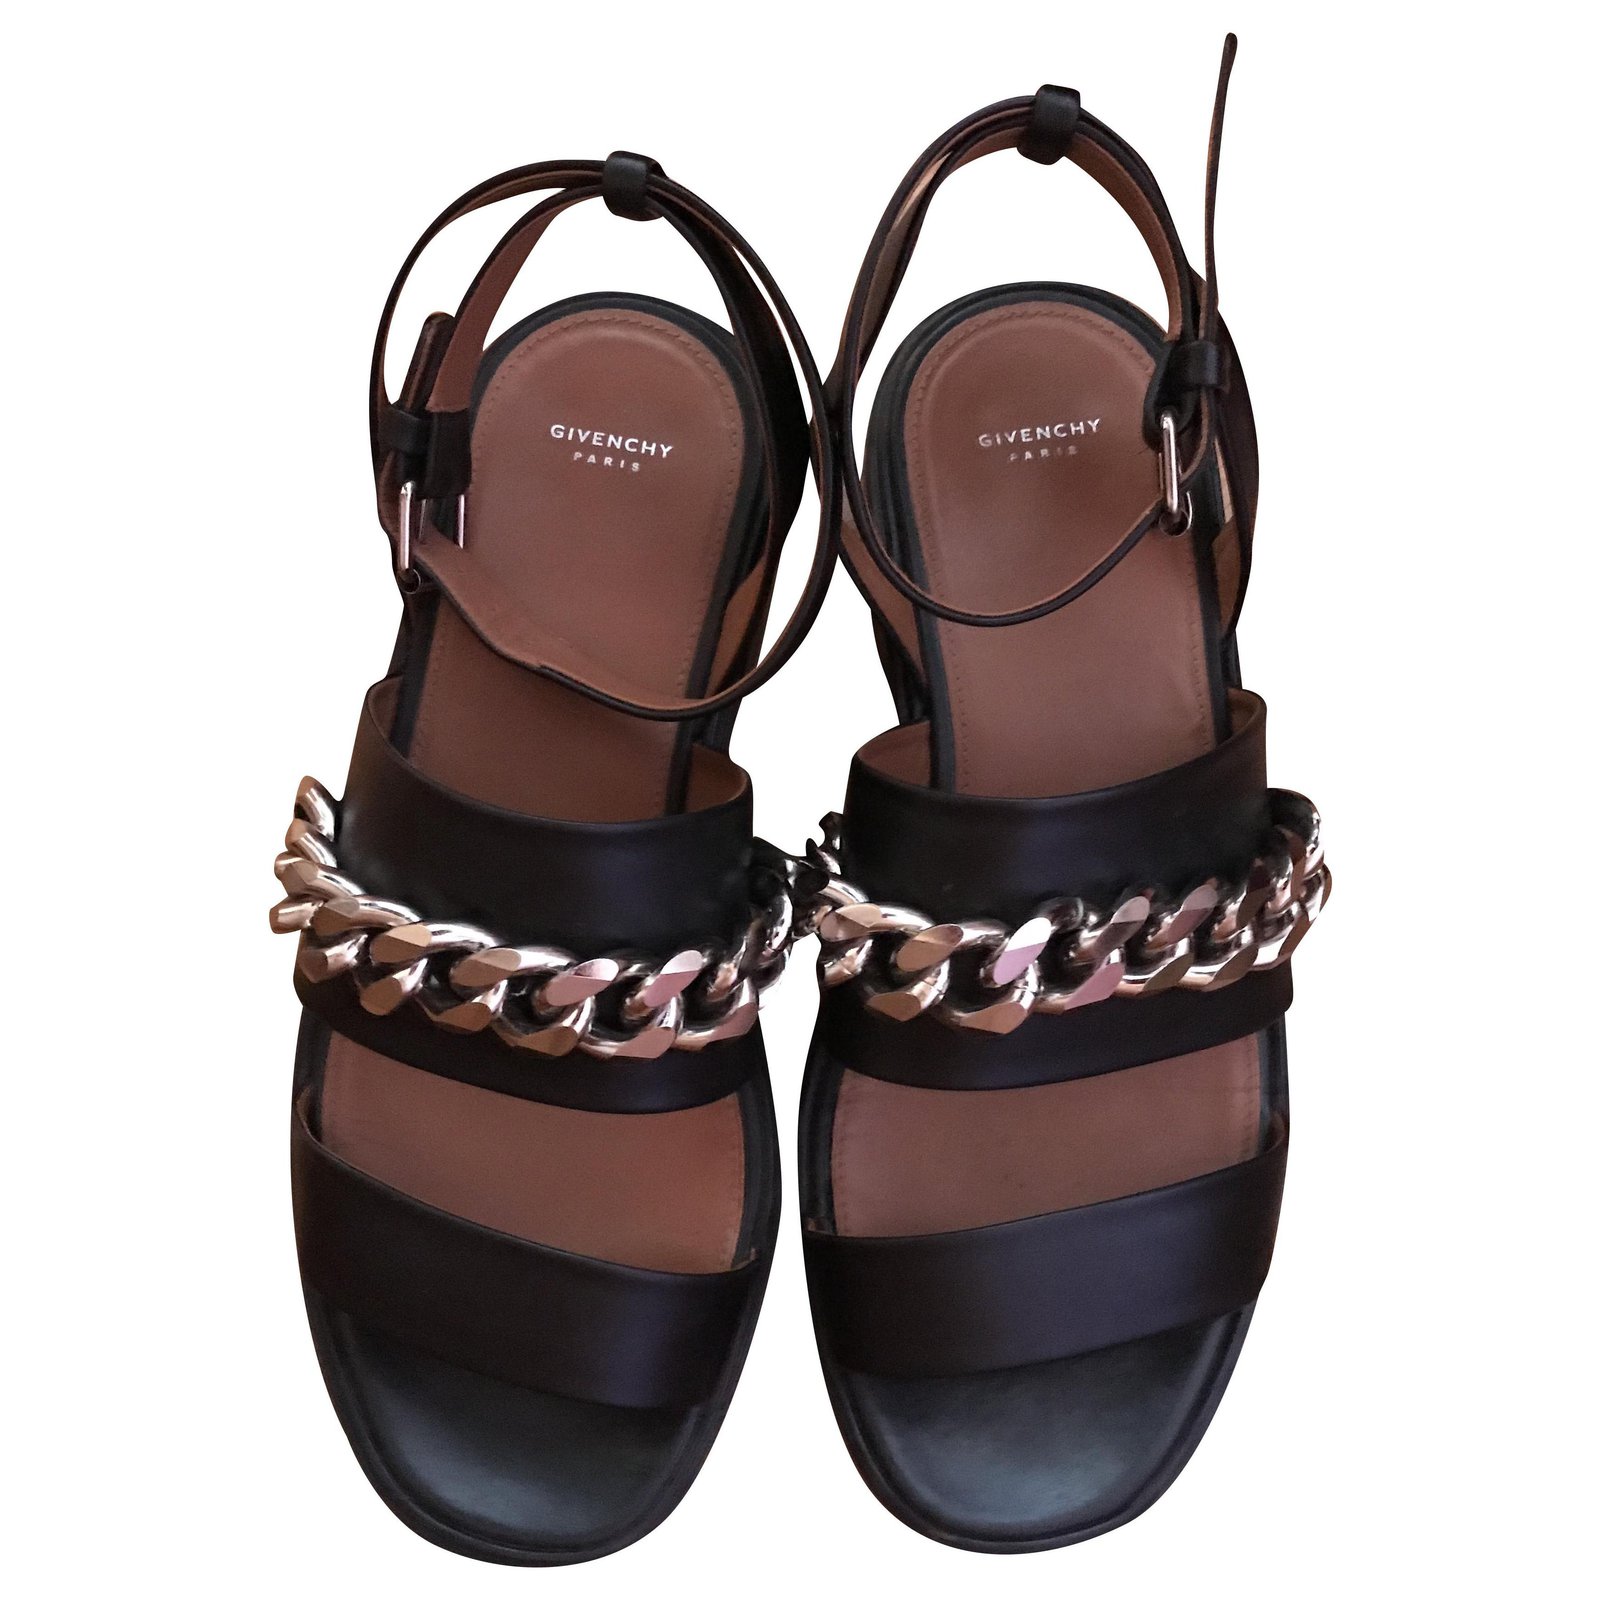 givenchy chain sandals